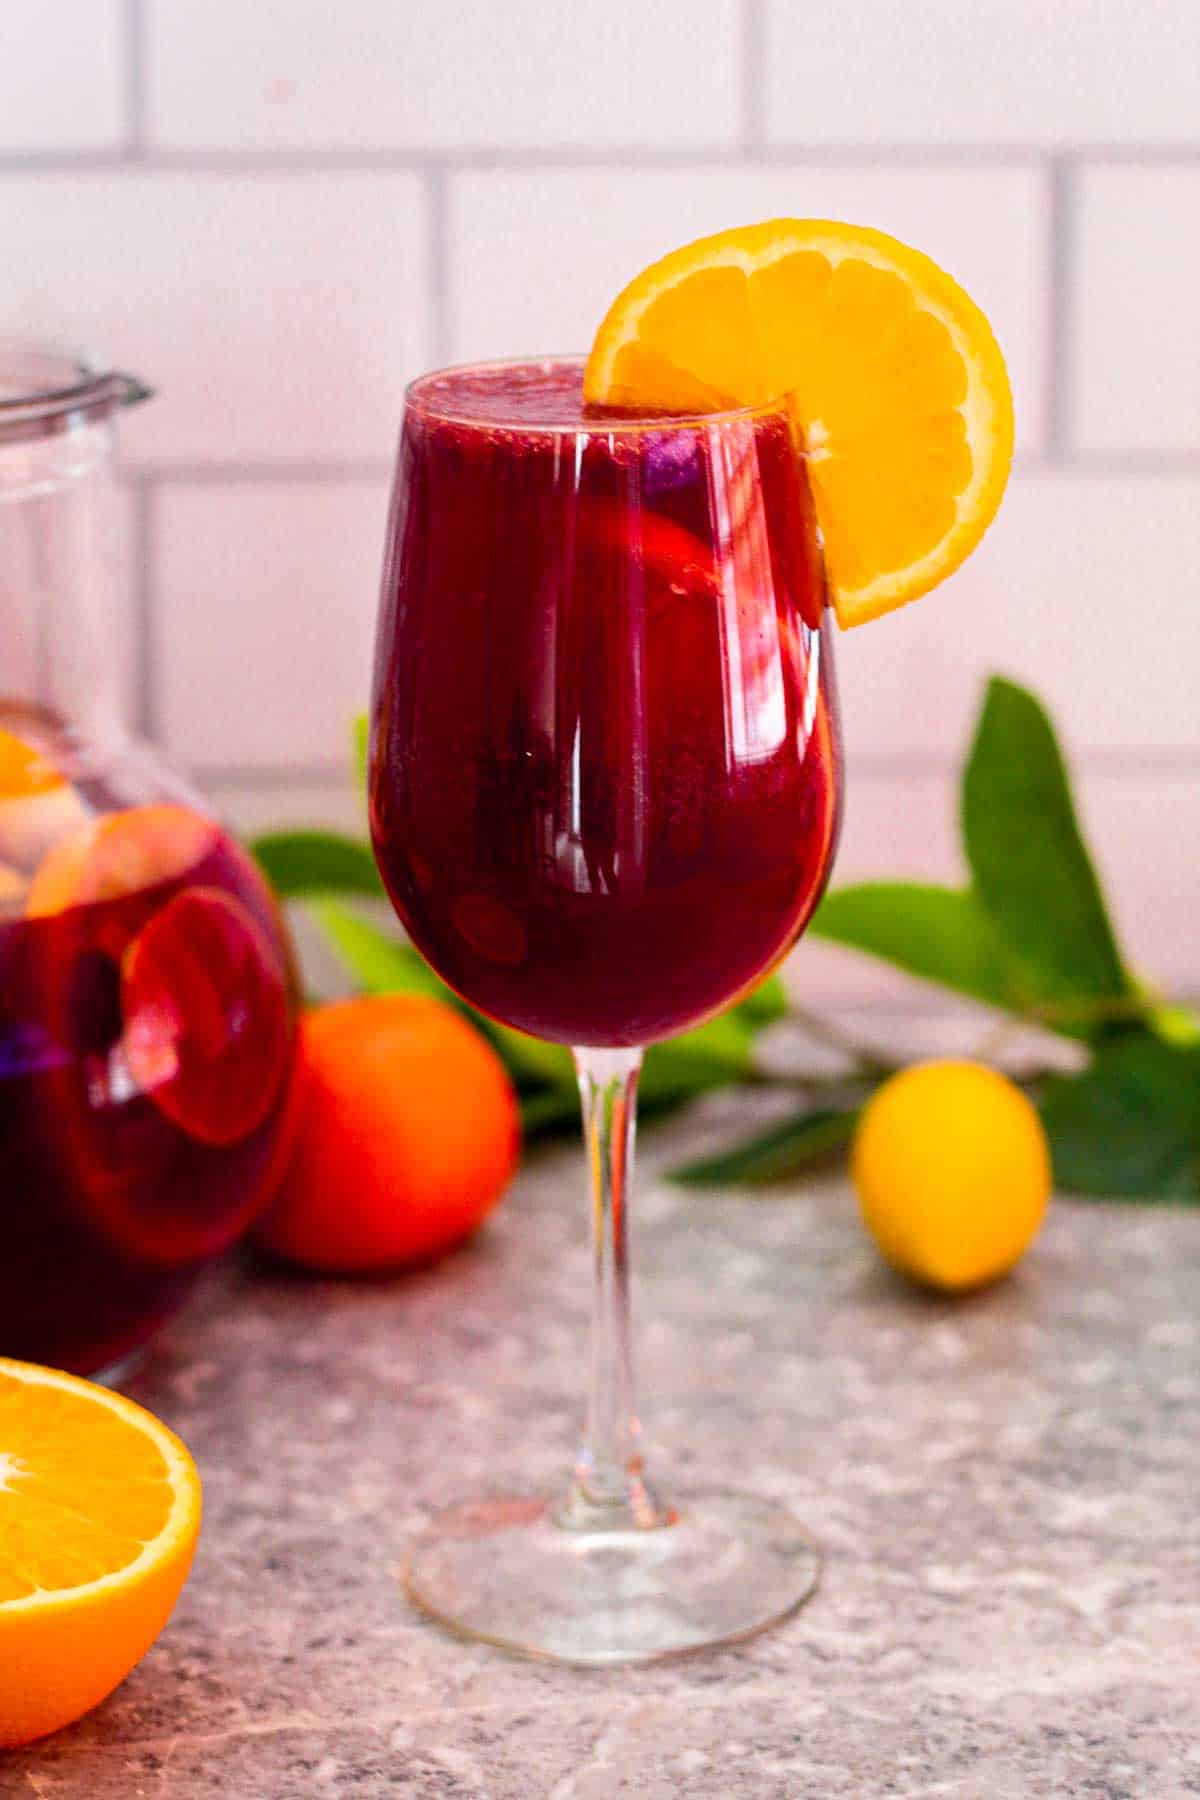 A glass of citrus sangria with red wine. Glass is garnished with a slice of navel orange. In the back